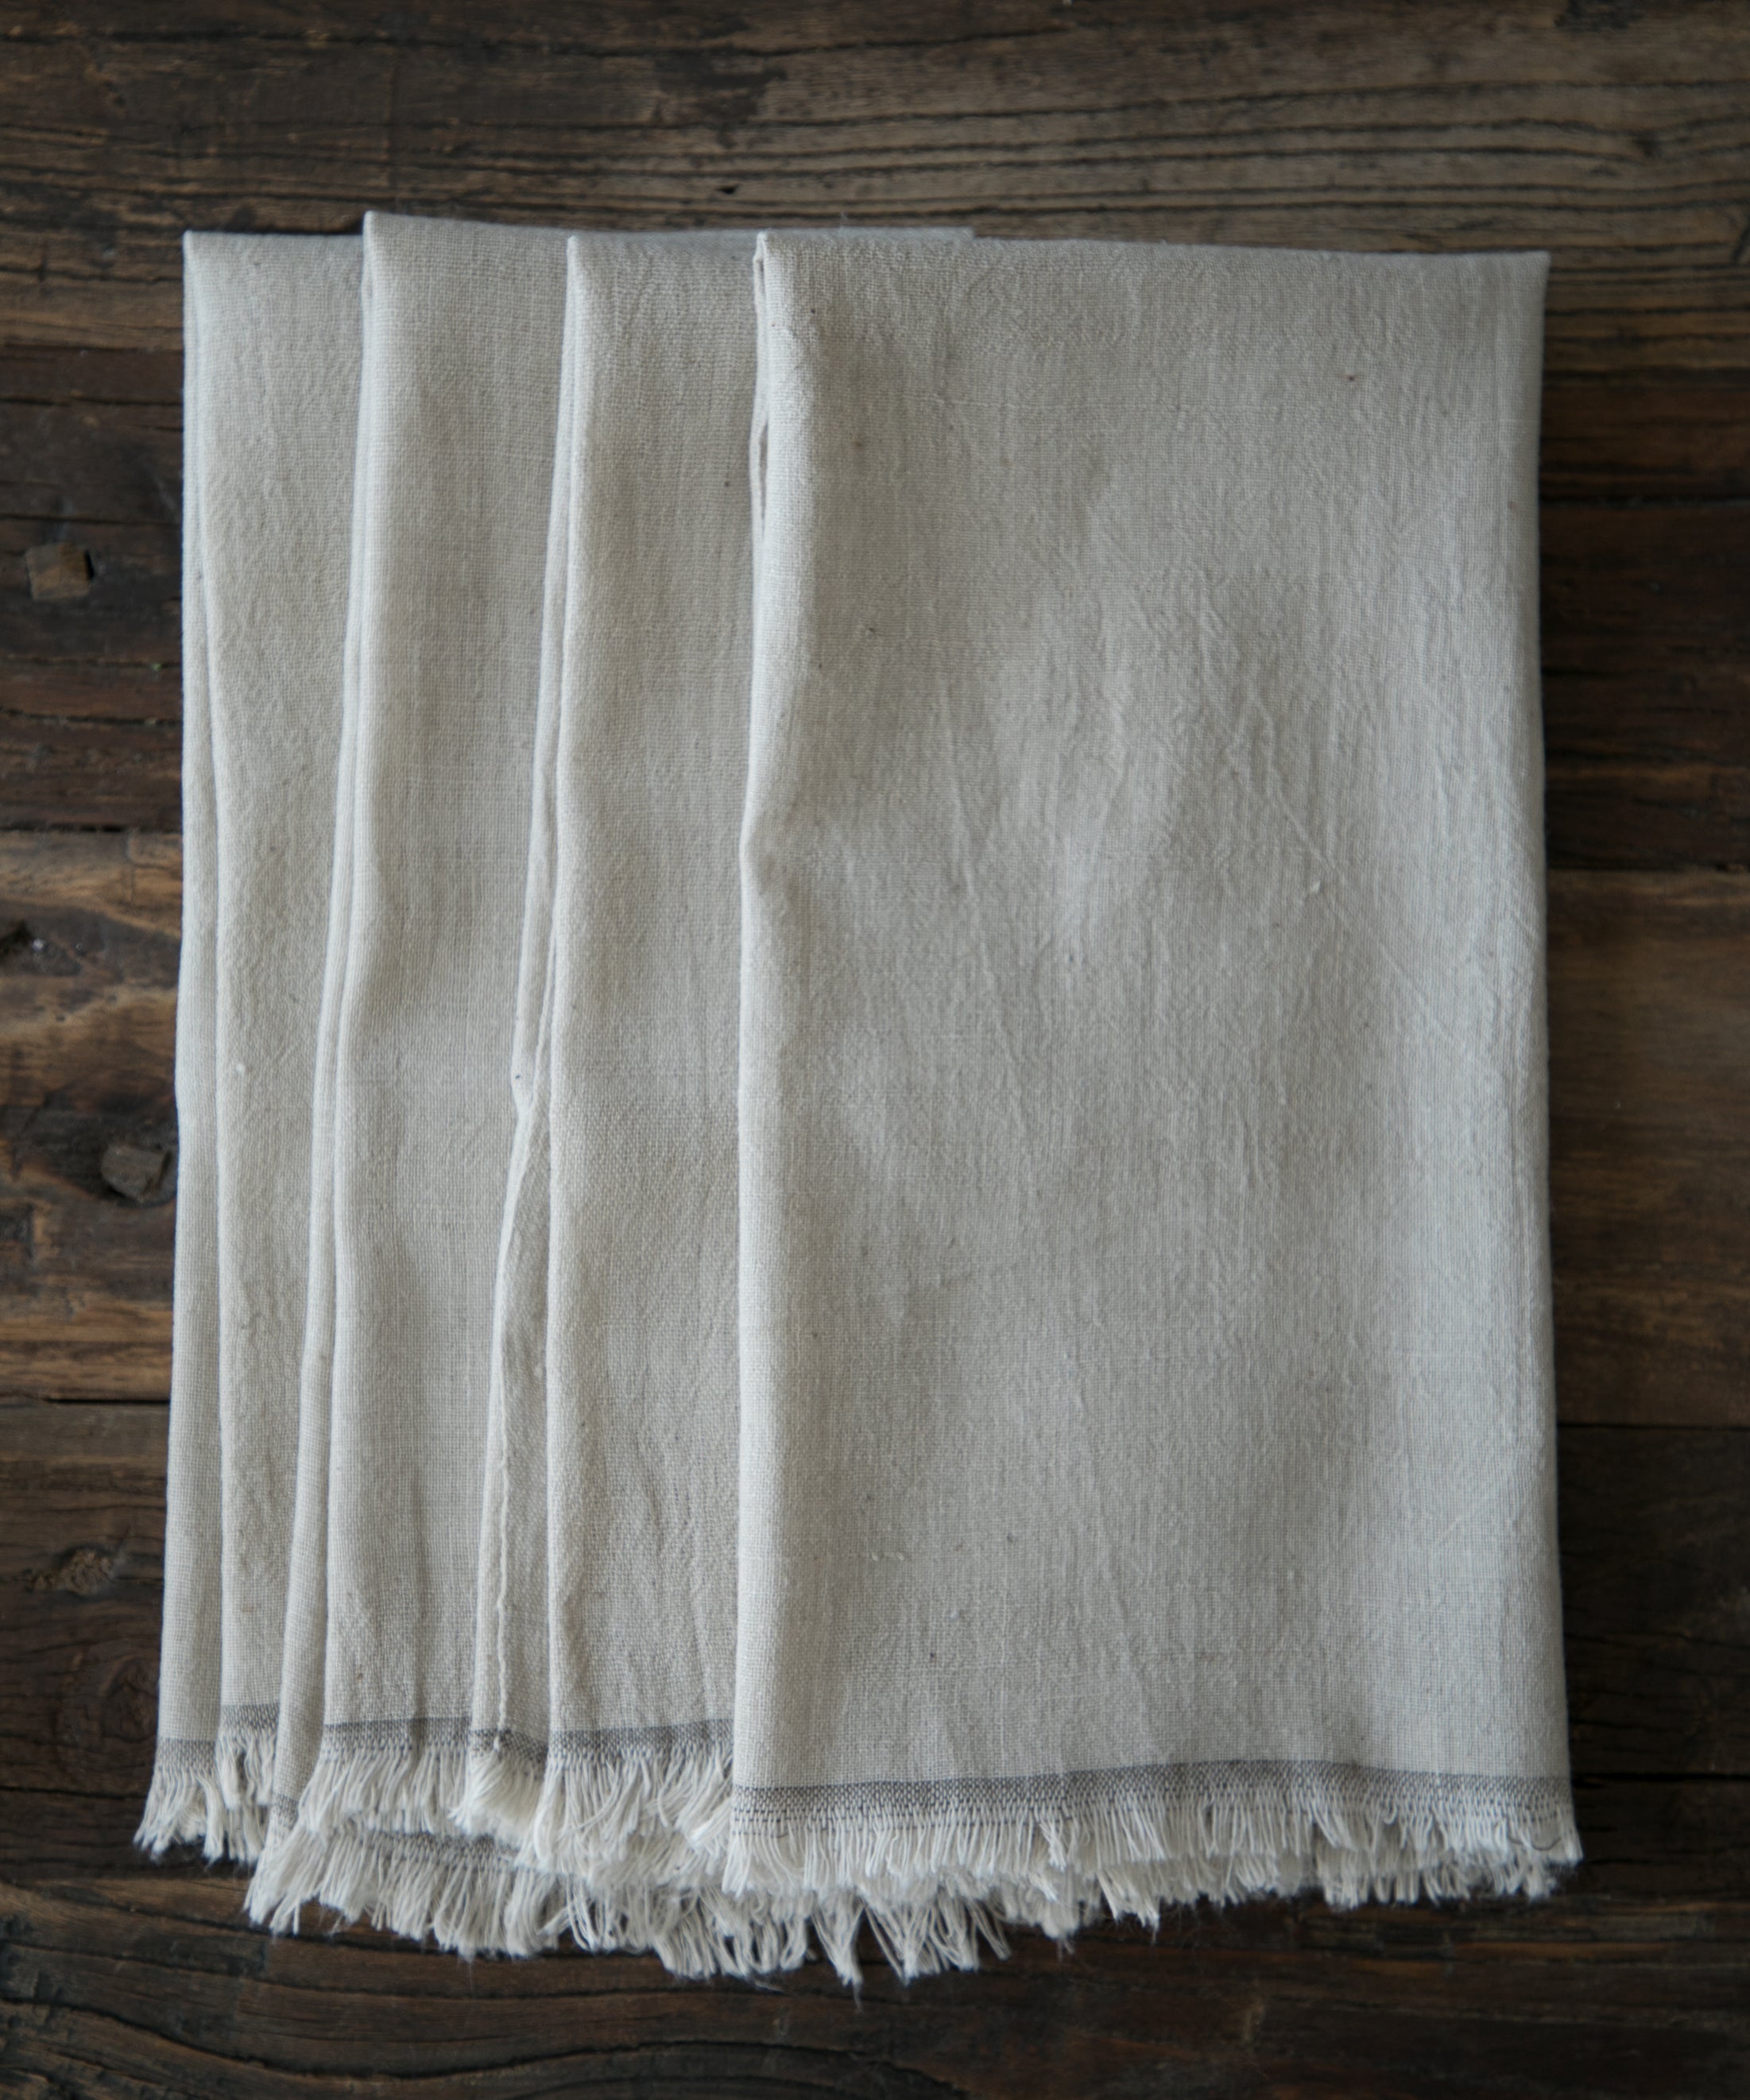 Silk & Willow plant dyed table linens. Napkins, organic cotton napkins. natural cotton napkins. Table setting.